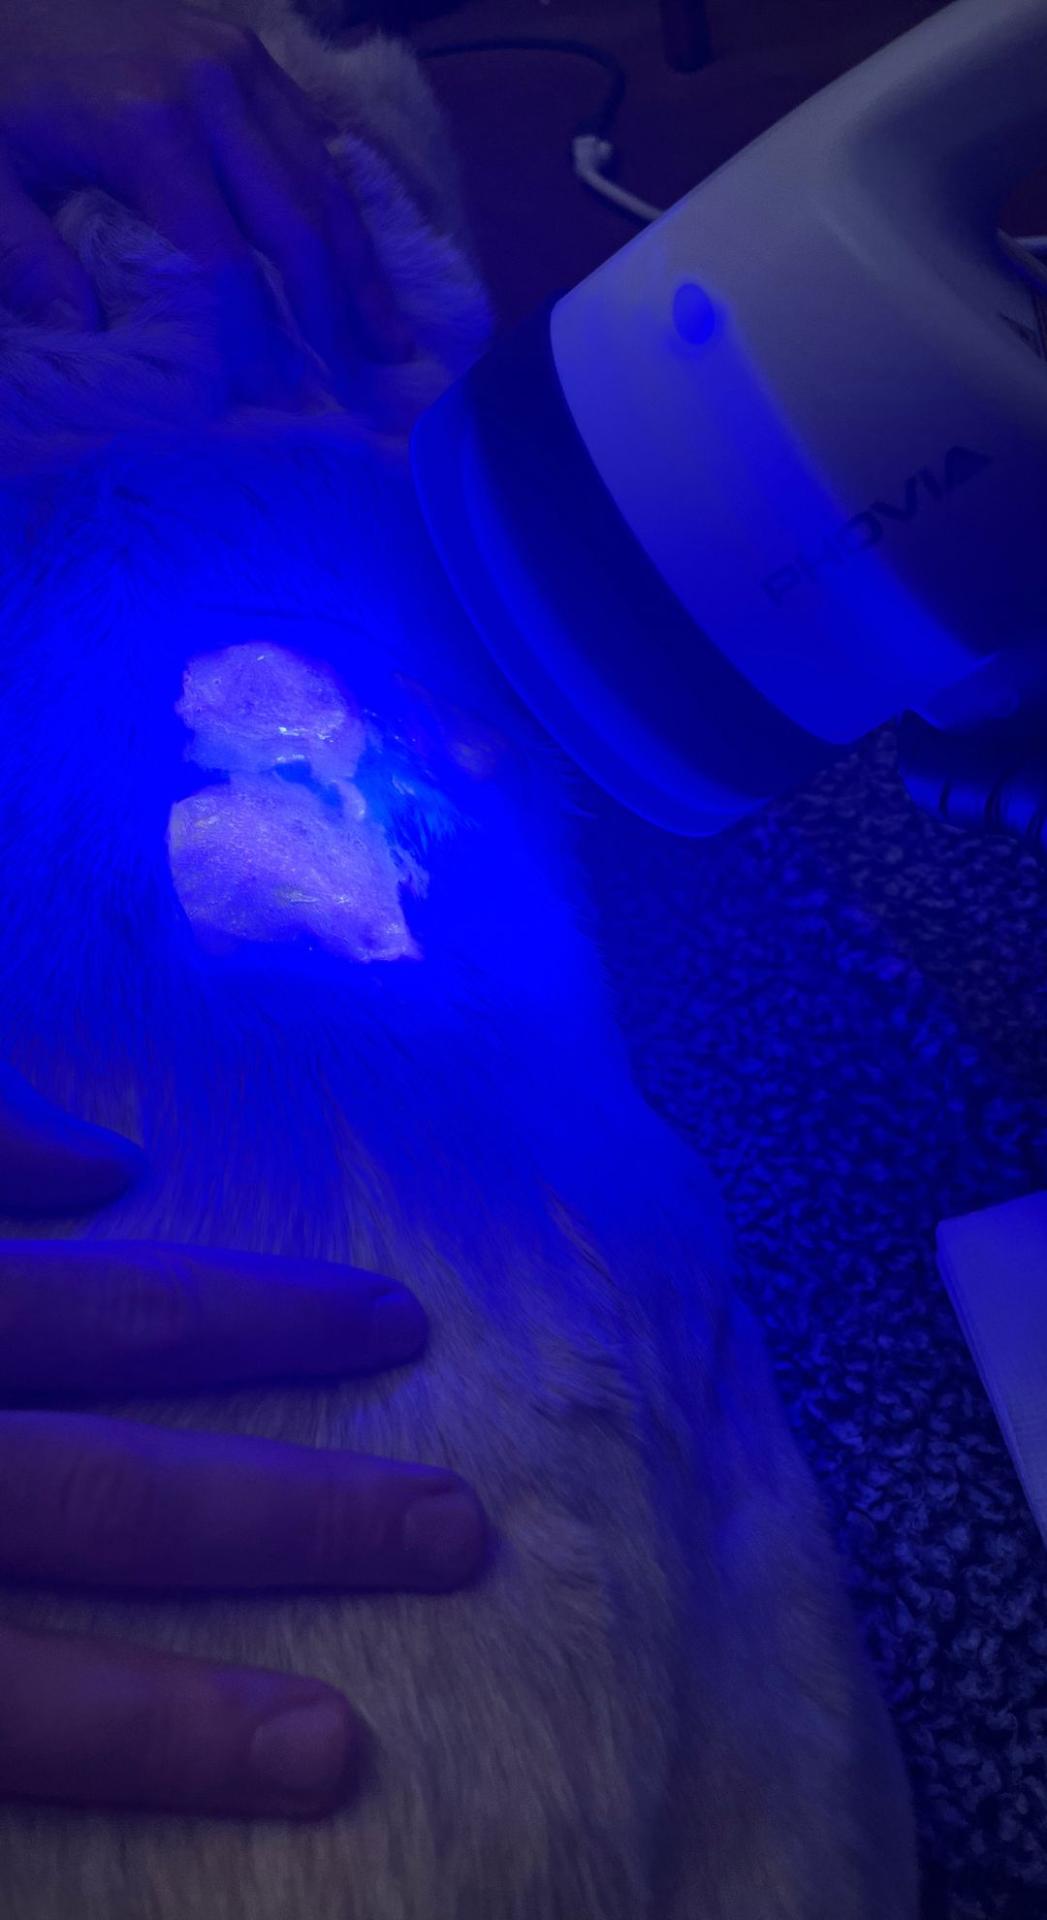 Light therapy gives your pet’s cells the energy needed to heal themselves more quickly.